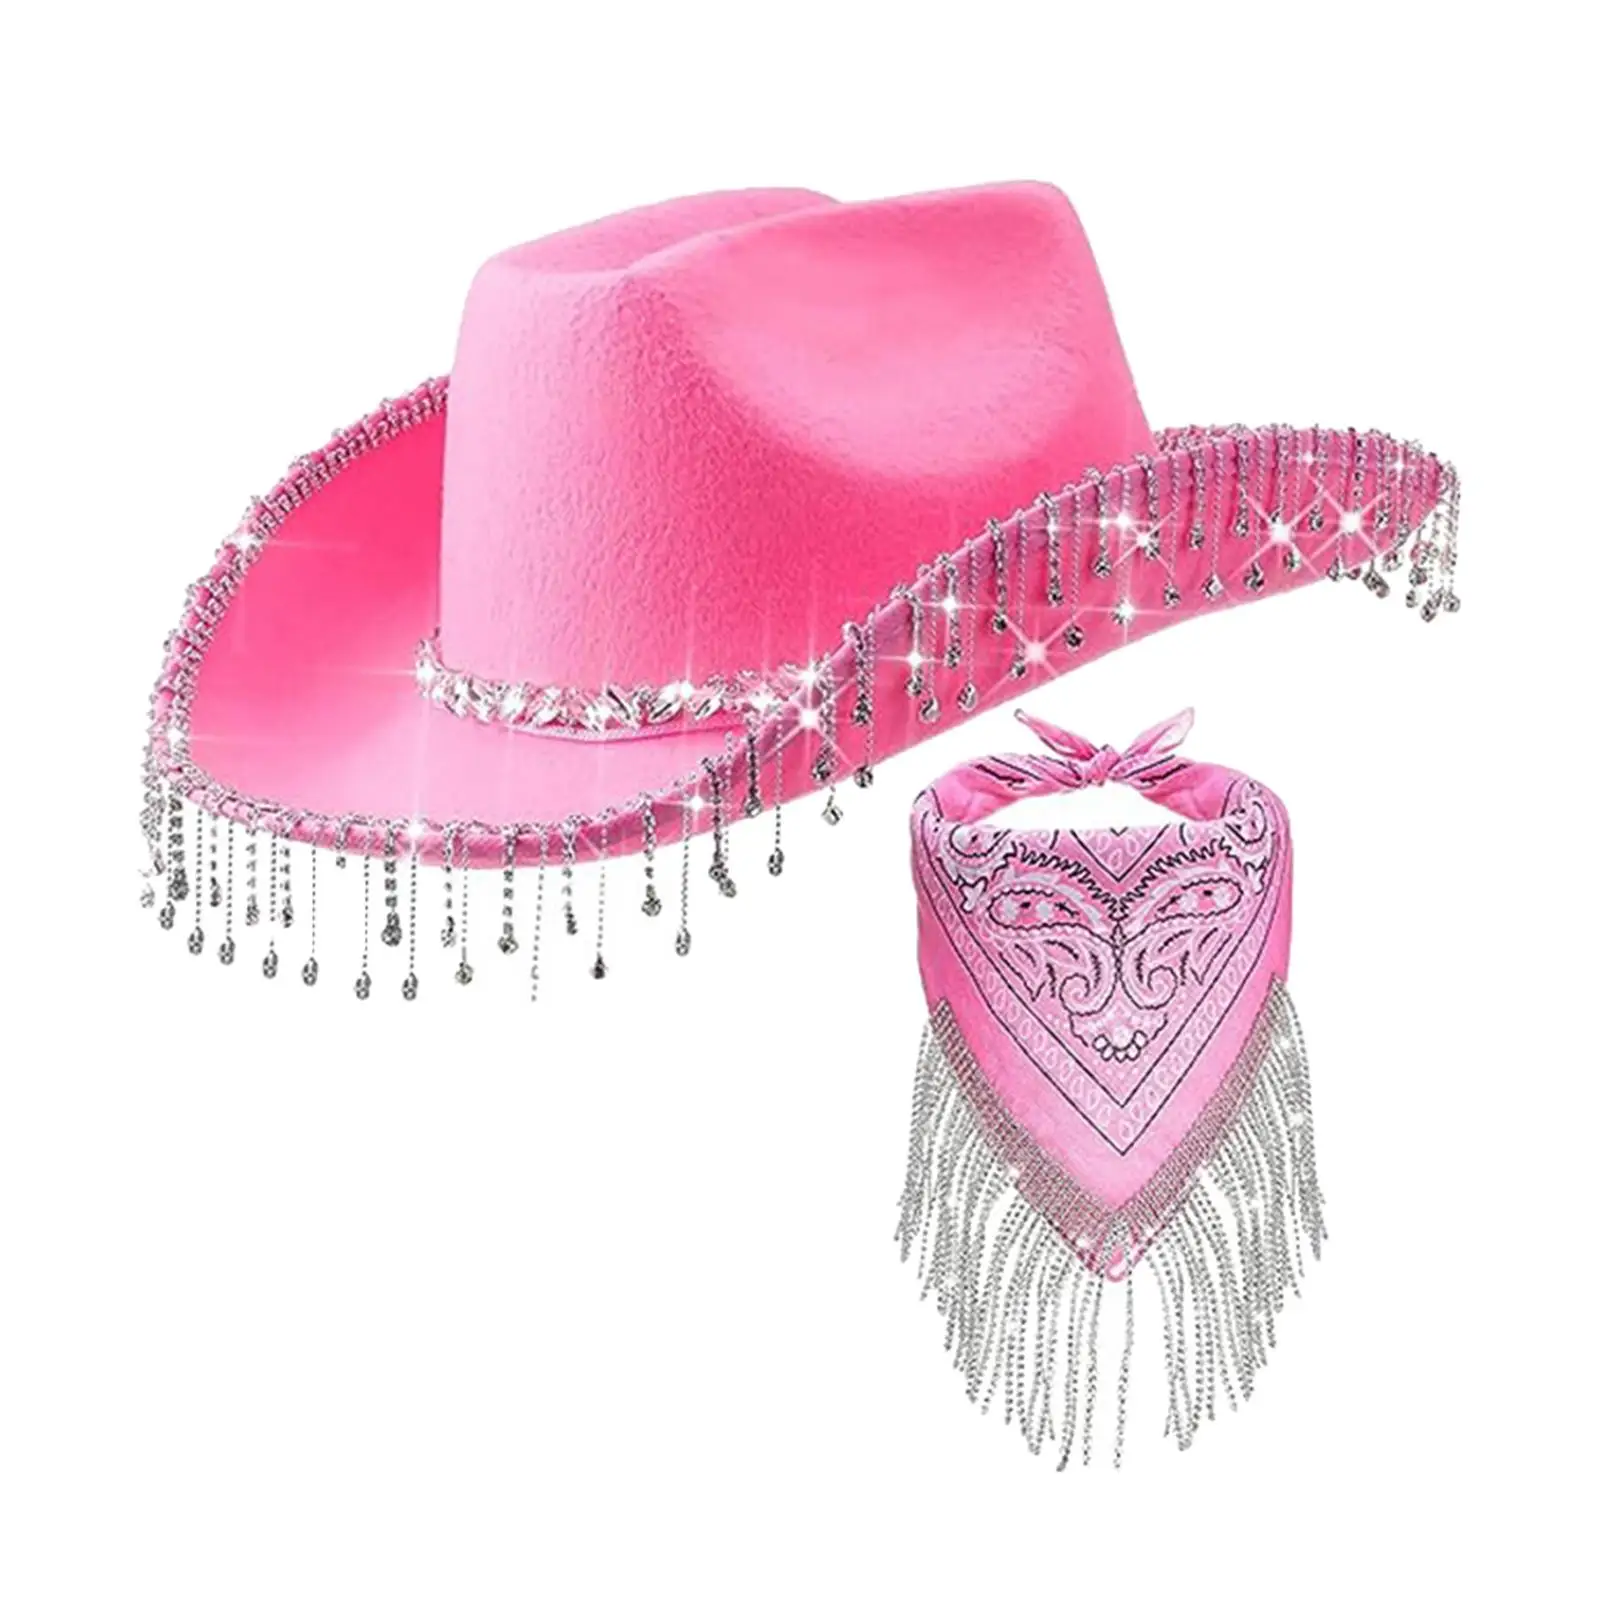 Cowboy Hat with Fringed Bandana Set Big Brim Cap Cowgirl Hat Party Hat for Men Women Celebration Role Play Party Favors Travel